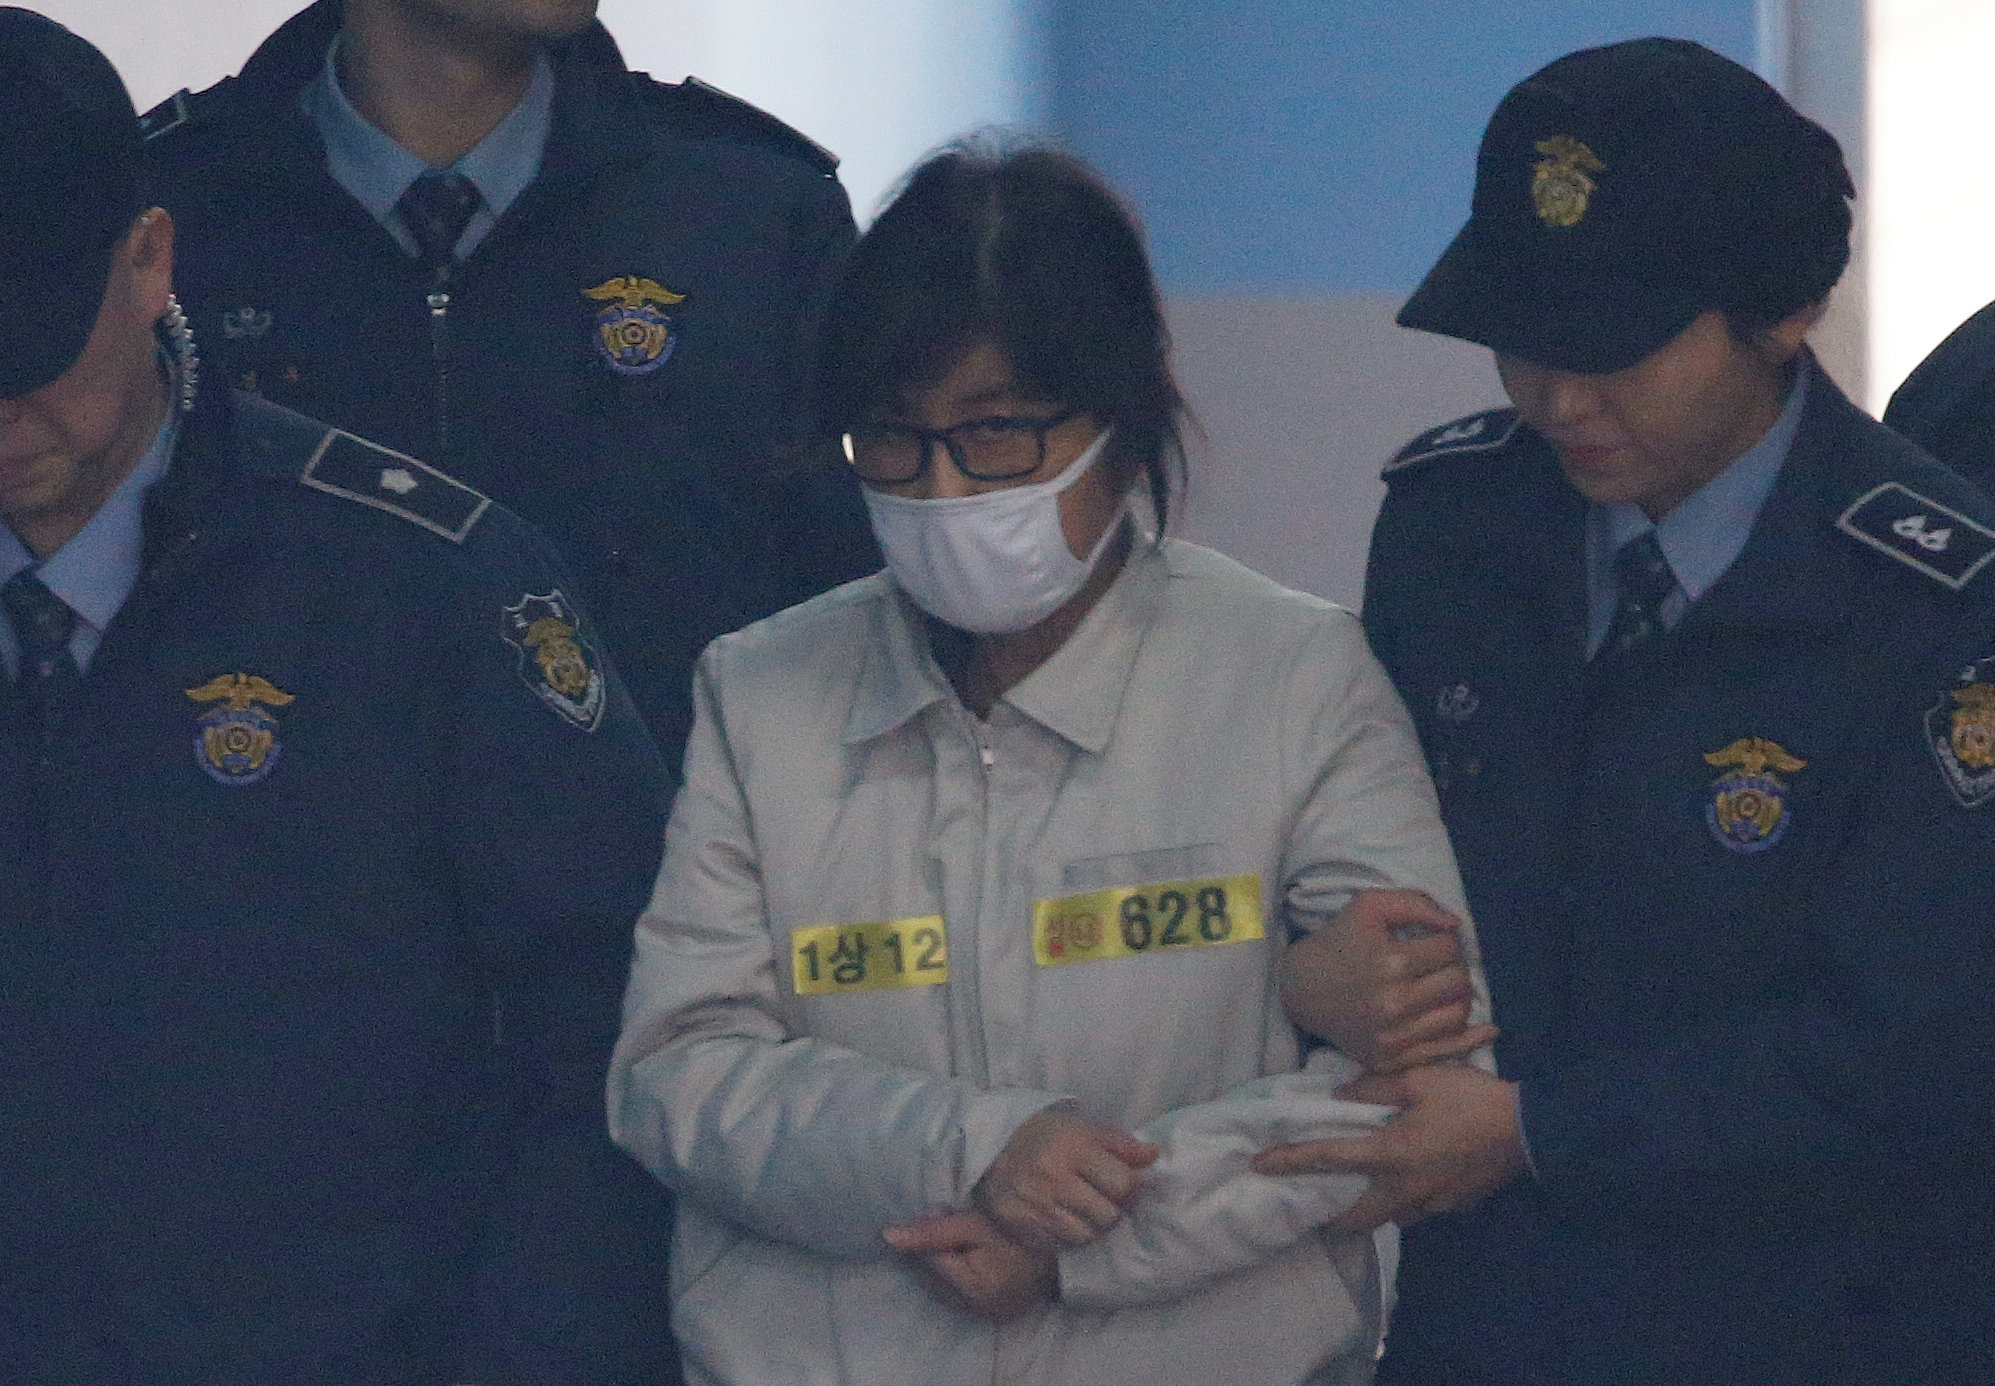 Choi Soon-sil (wearing white mask), a long-time friend of South Korean President Park Geun-hye who is at the center of the South Korean political scandal involving Park, arrives for her first court hearing in Seoul, South Korea, December 19, 2016. REUTERS